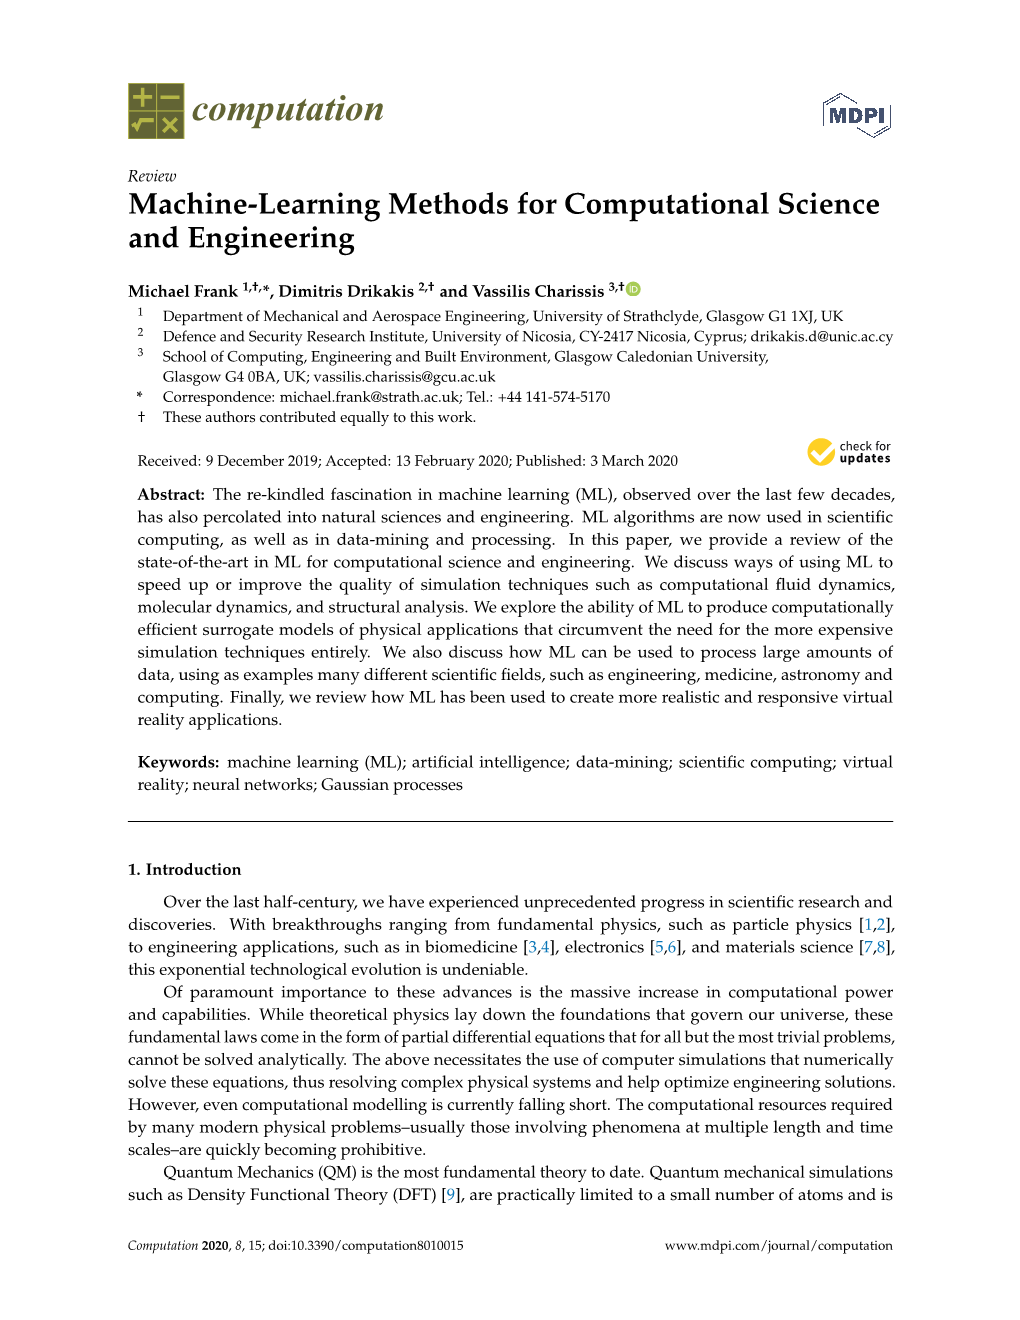 Machine-Learning Methods for Computational Science and Engineering